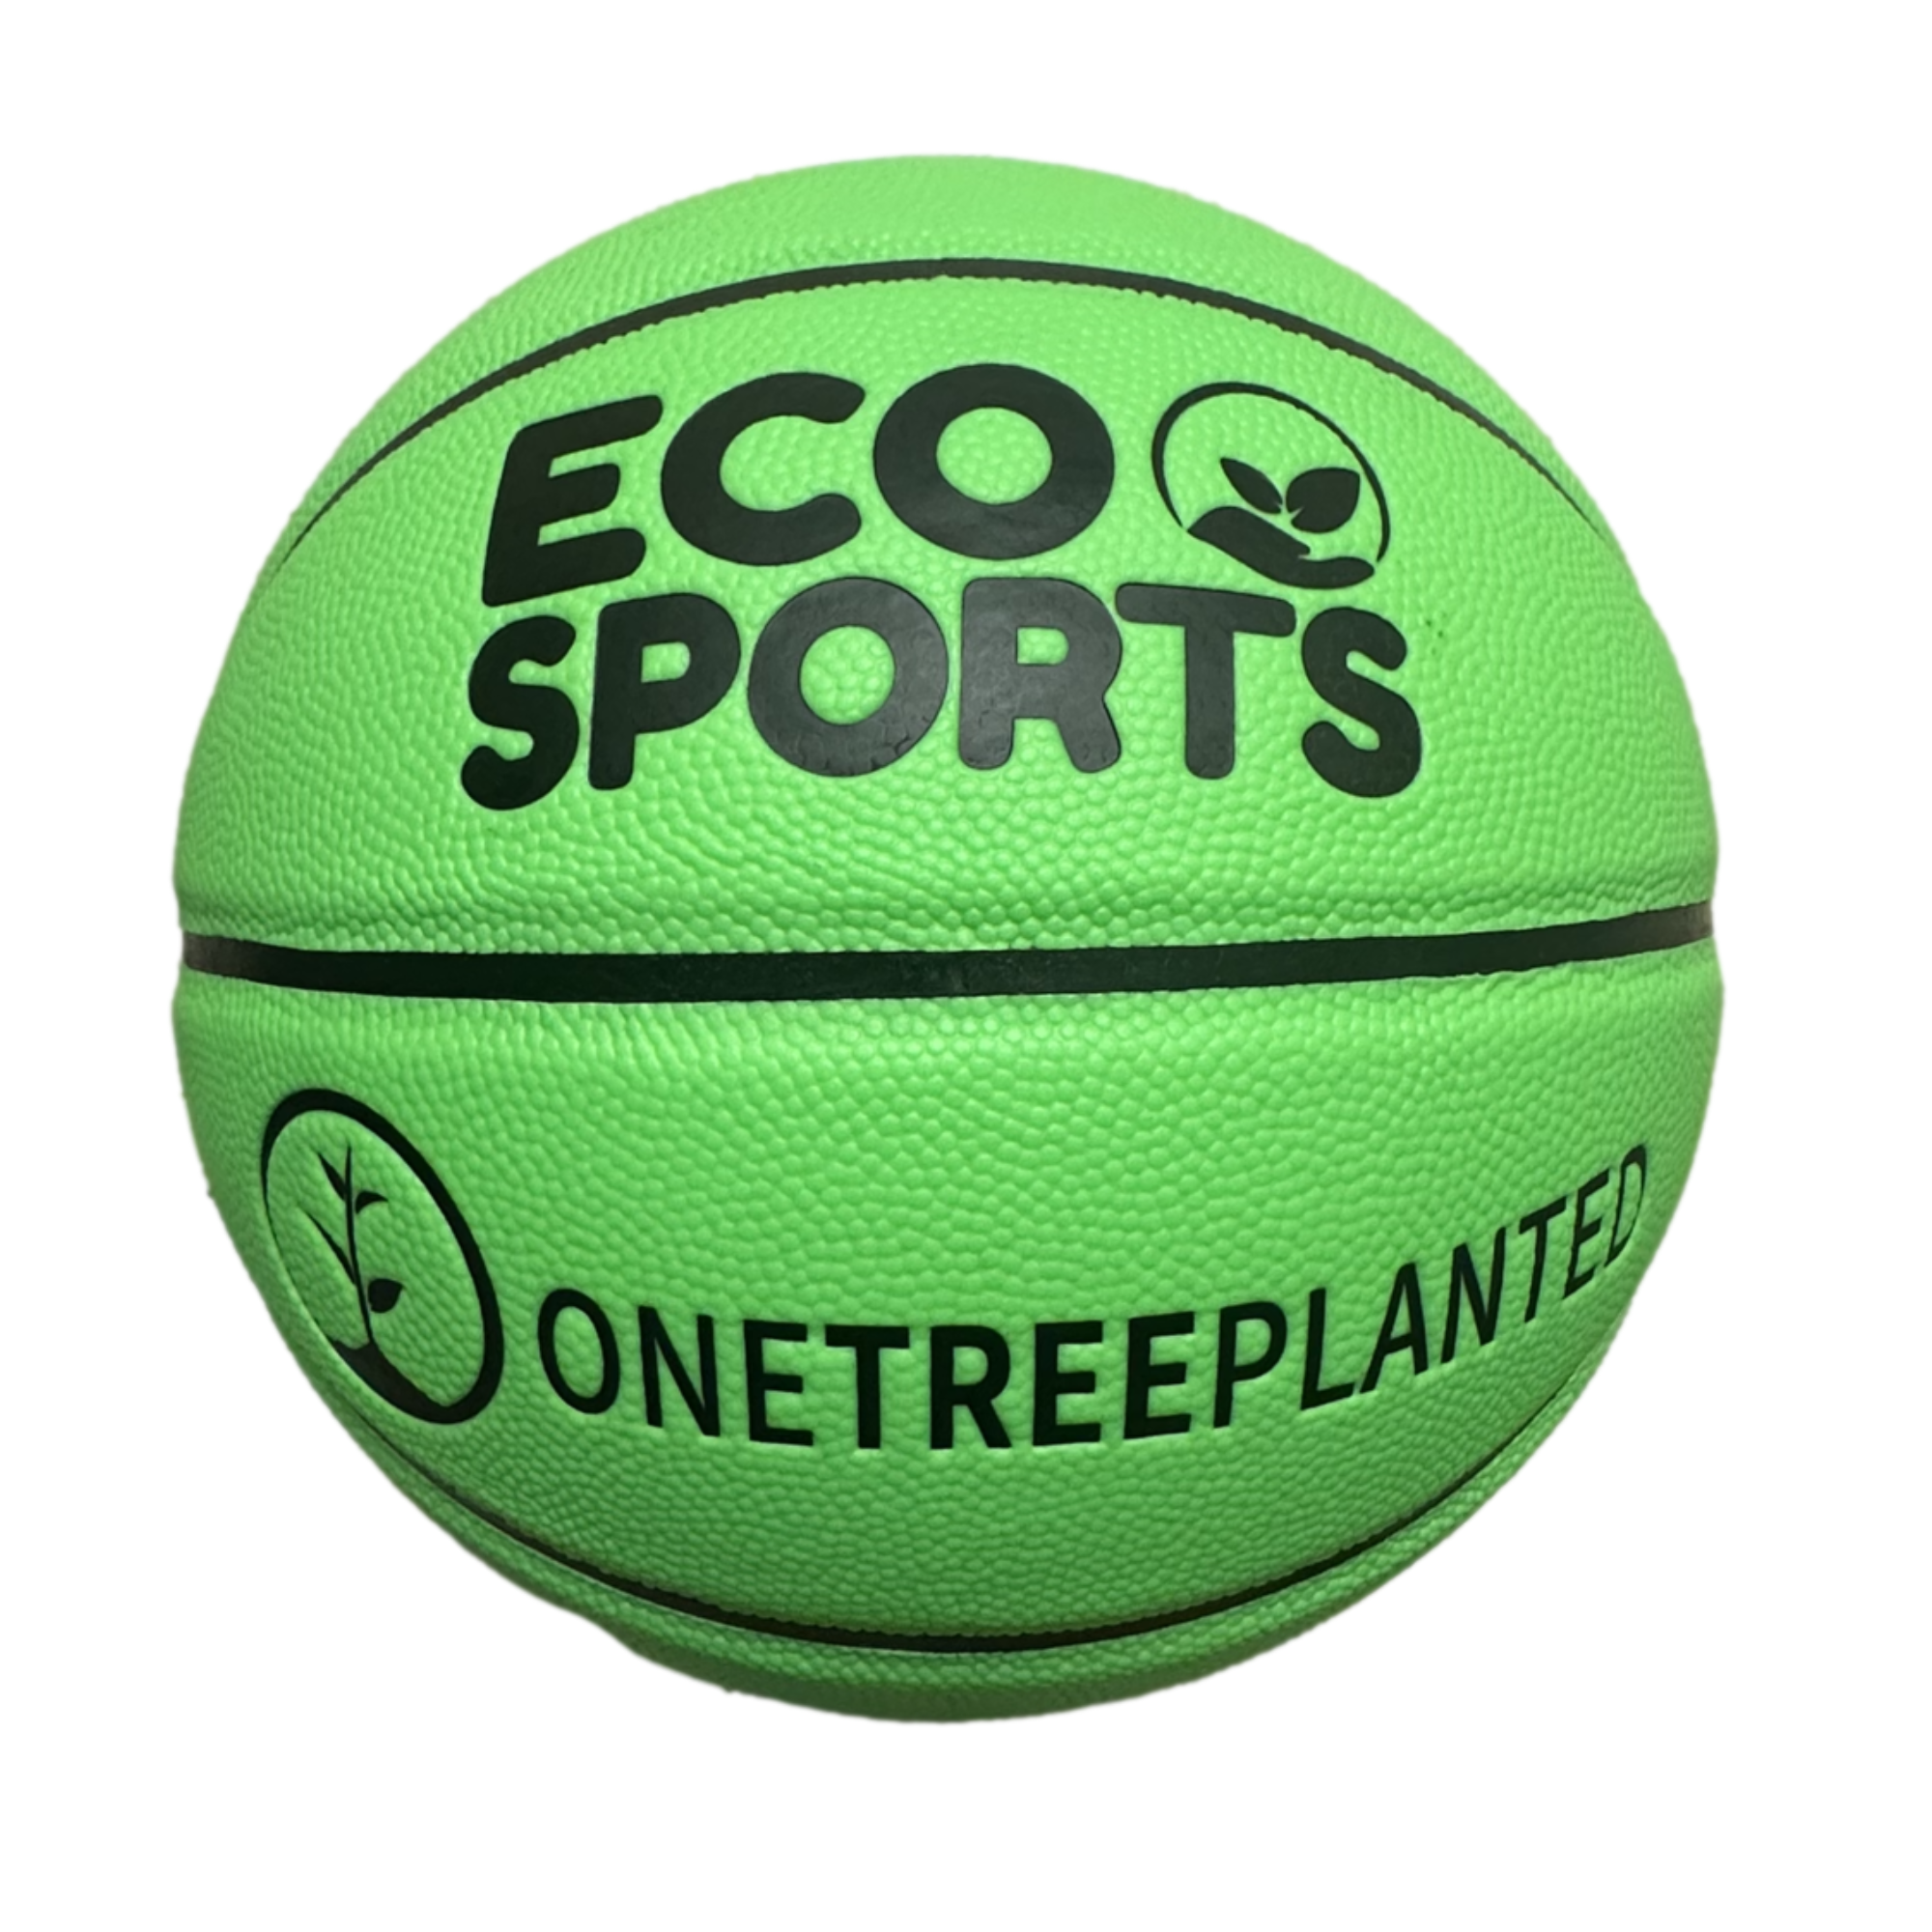 U.S. and Canada Sports Organizations Offer Varying Green Sports